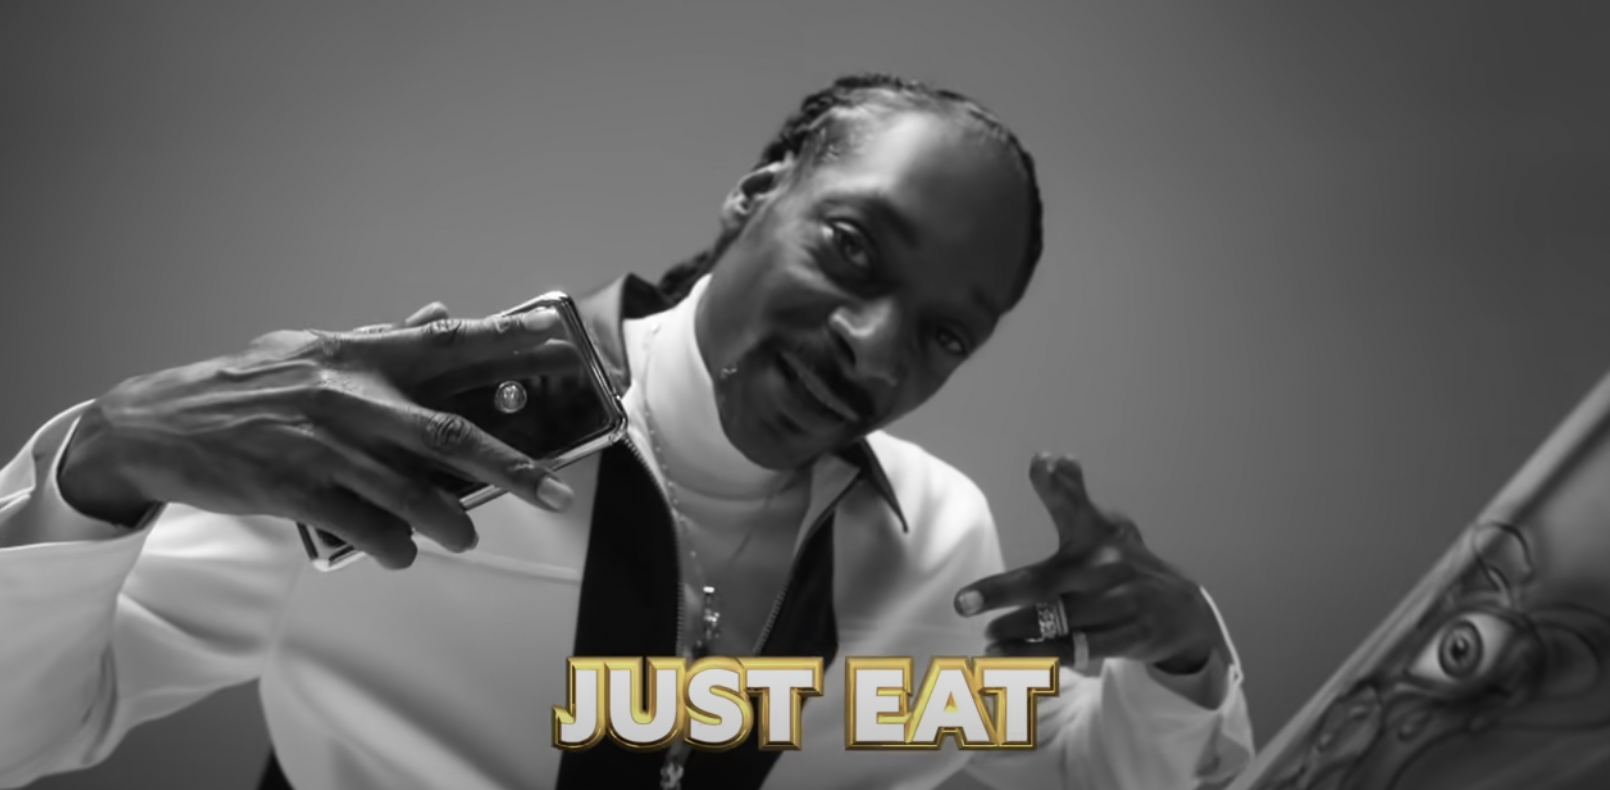 Snoop Dogg appears in black and white with the words "Just Eat"